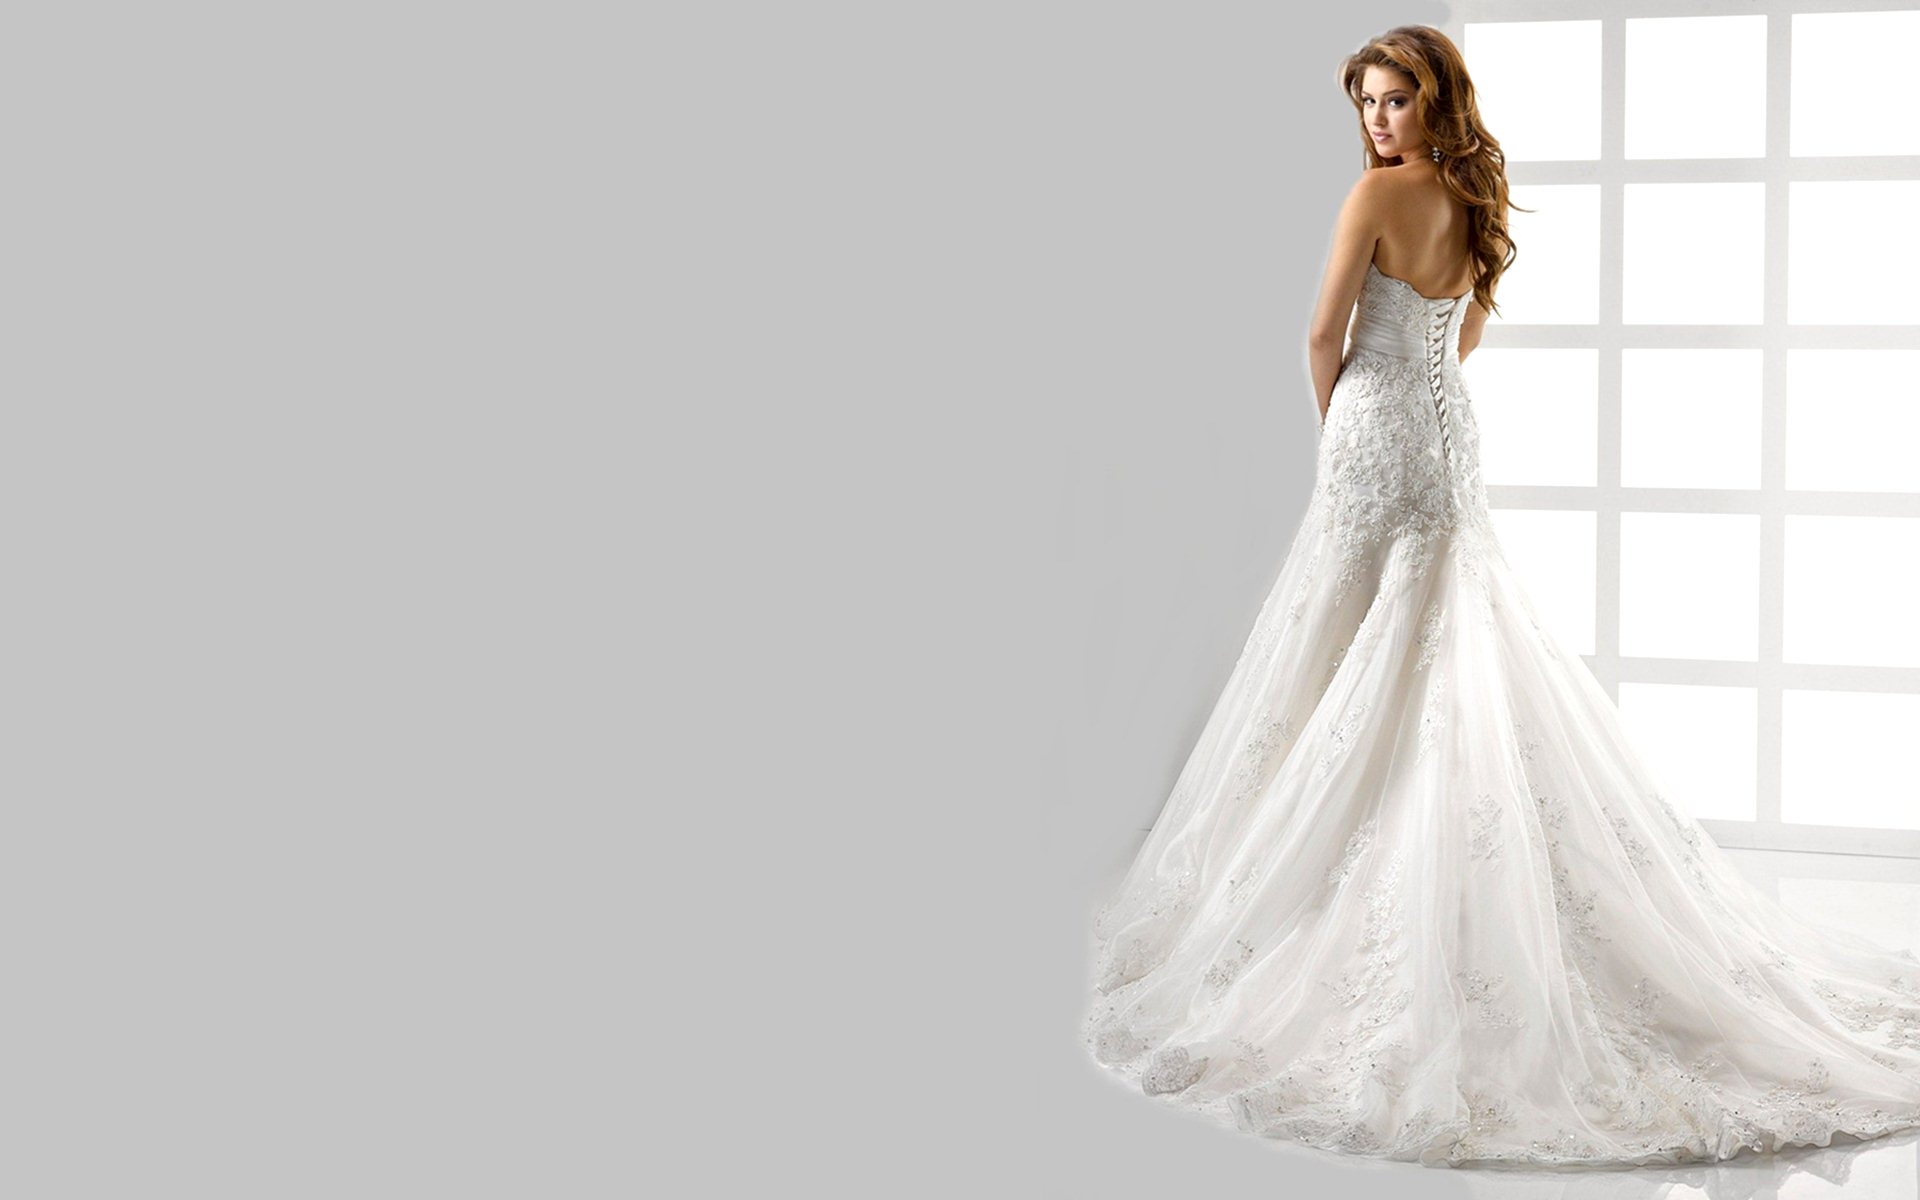 Wedding Gown Wallpapers Wallpaper Cave